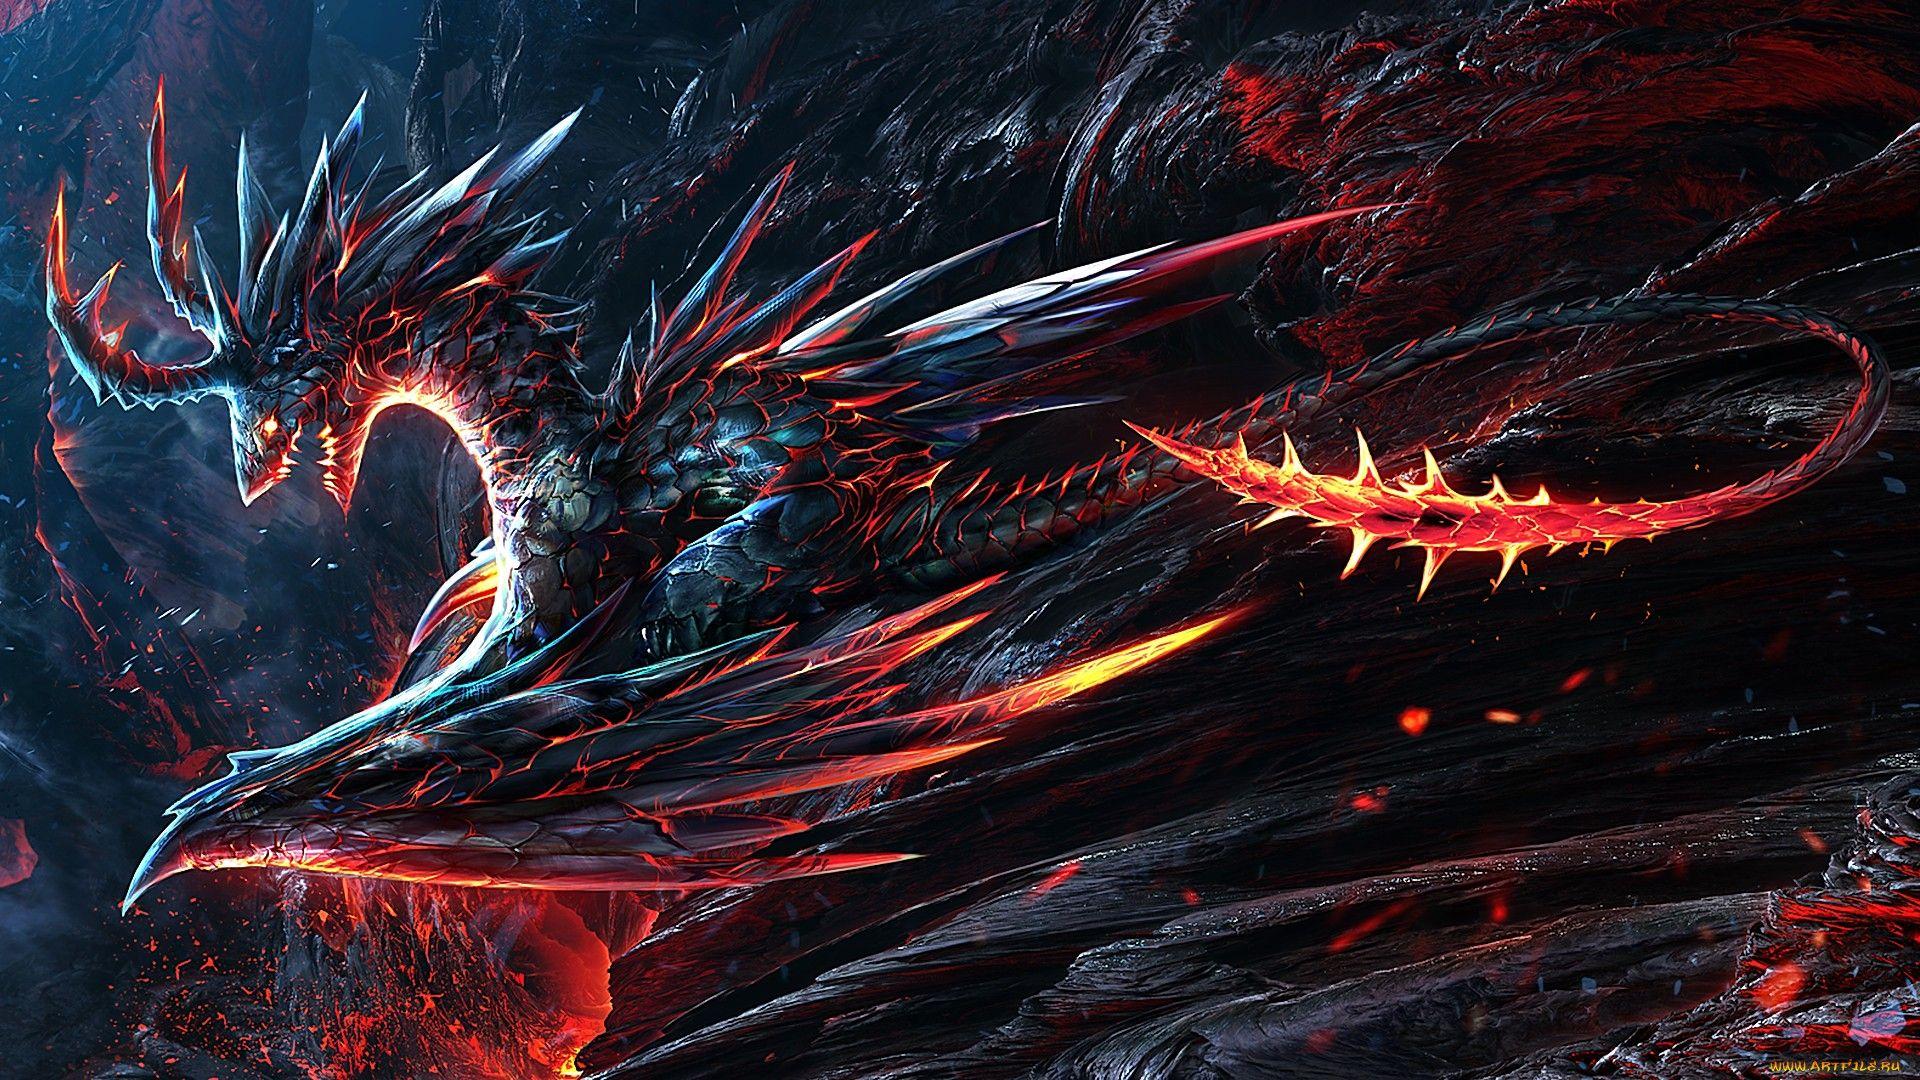 Molten Scales Full HD Wallpaper and Background Imagex1080